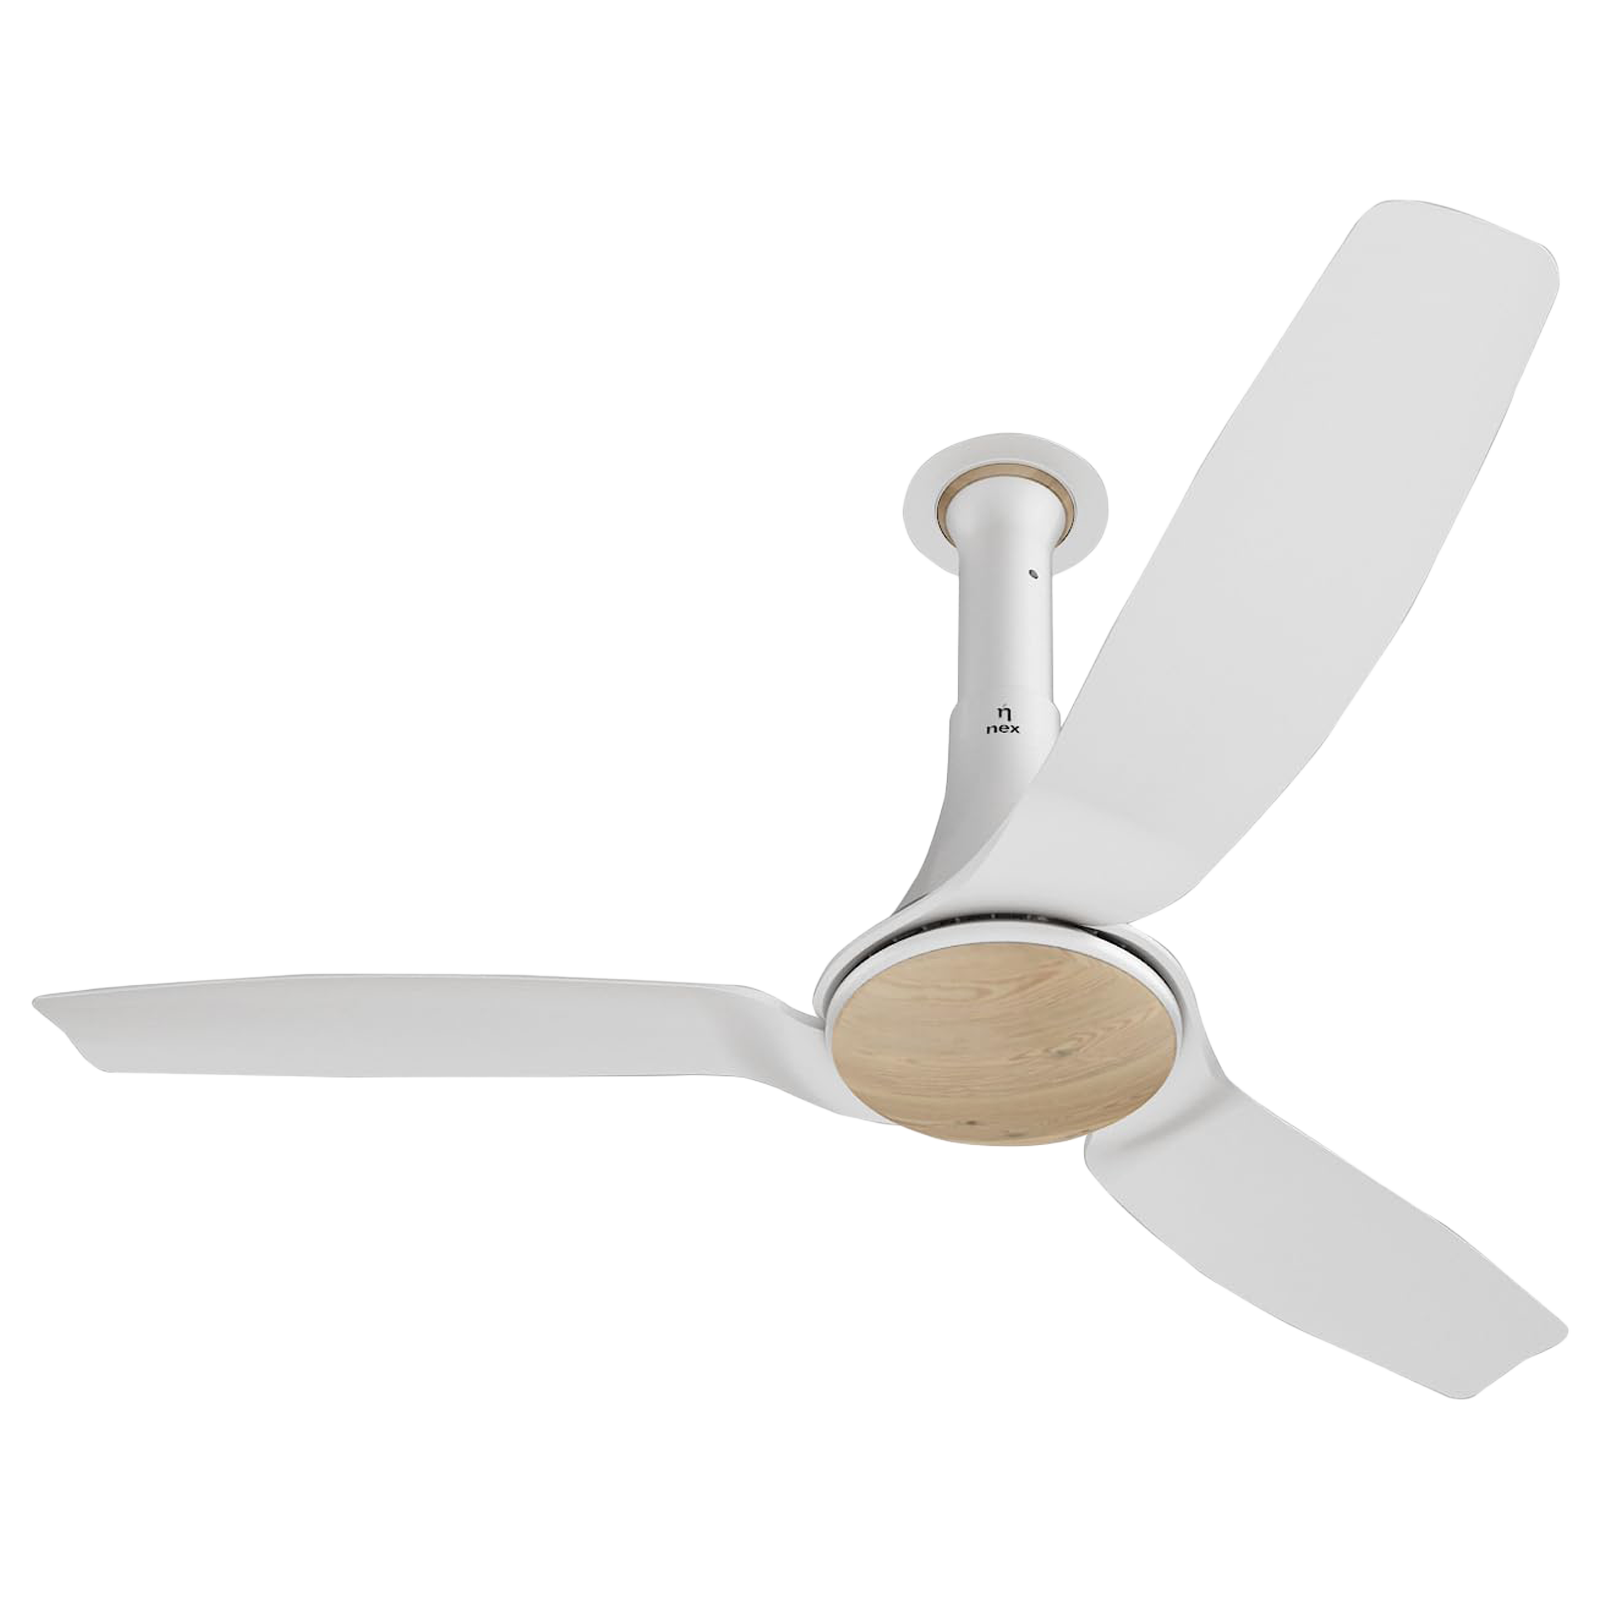 

BAJAJ Nex Dryft A90 5 Star 1200mm 3 Blade BLDC Motor Ceiling Fan with Remote (Dust Resistant, Classic White)